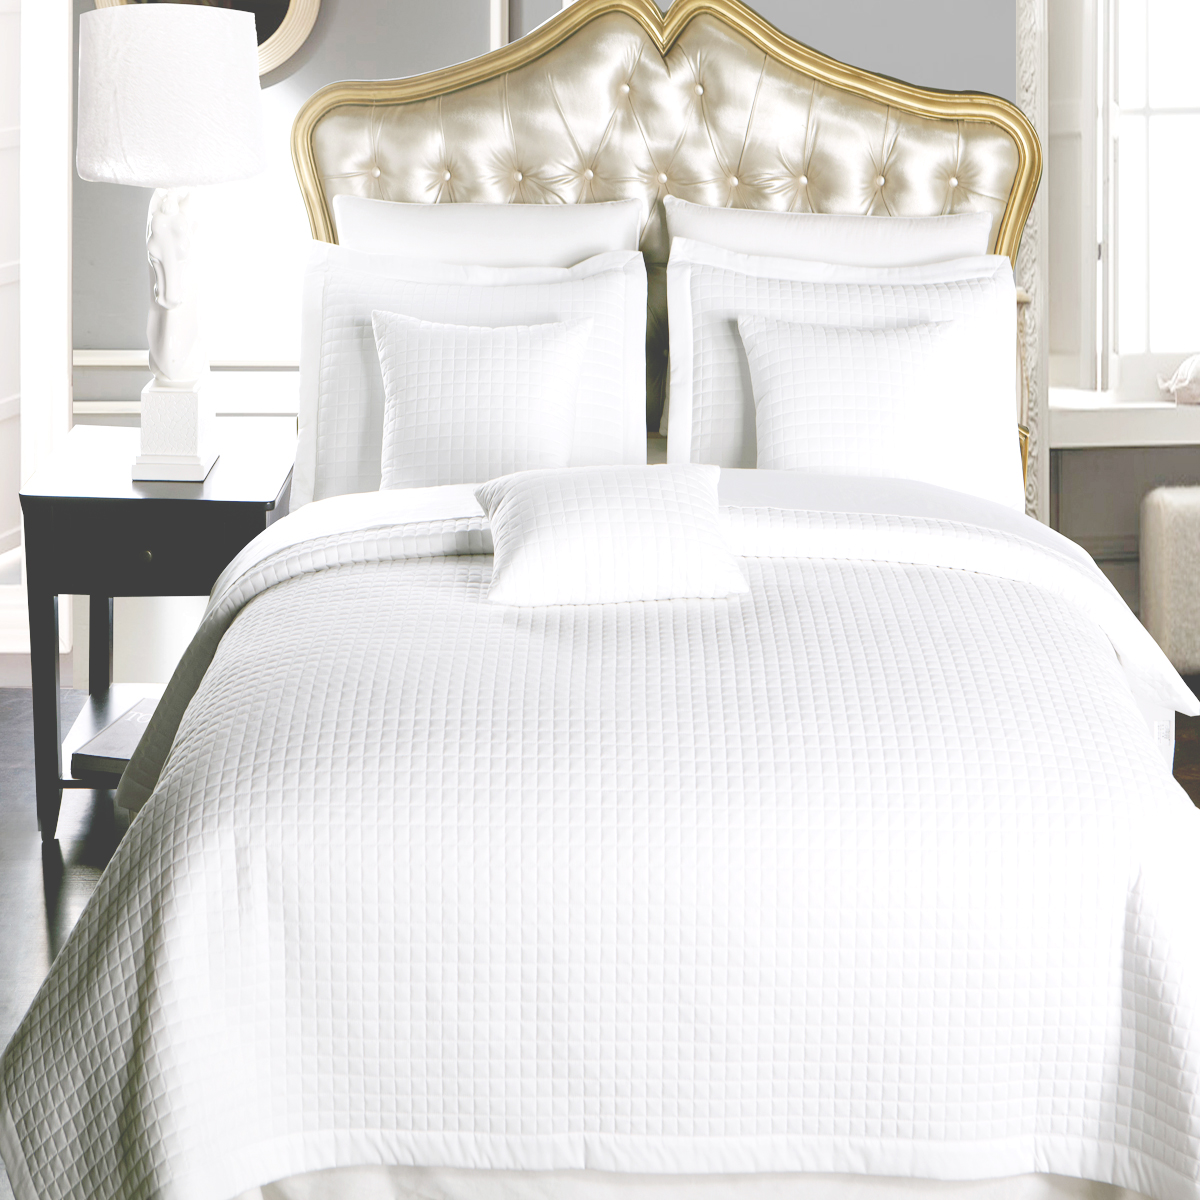 GoLinens Luxury White Checkered Quilted Wrinkle Free 6 Piece Coverlets Set [Coverlet, Shams + Decorative Pillows]